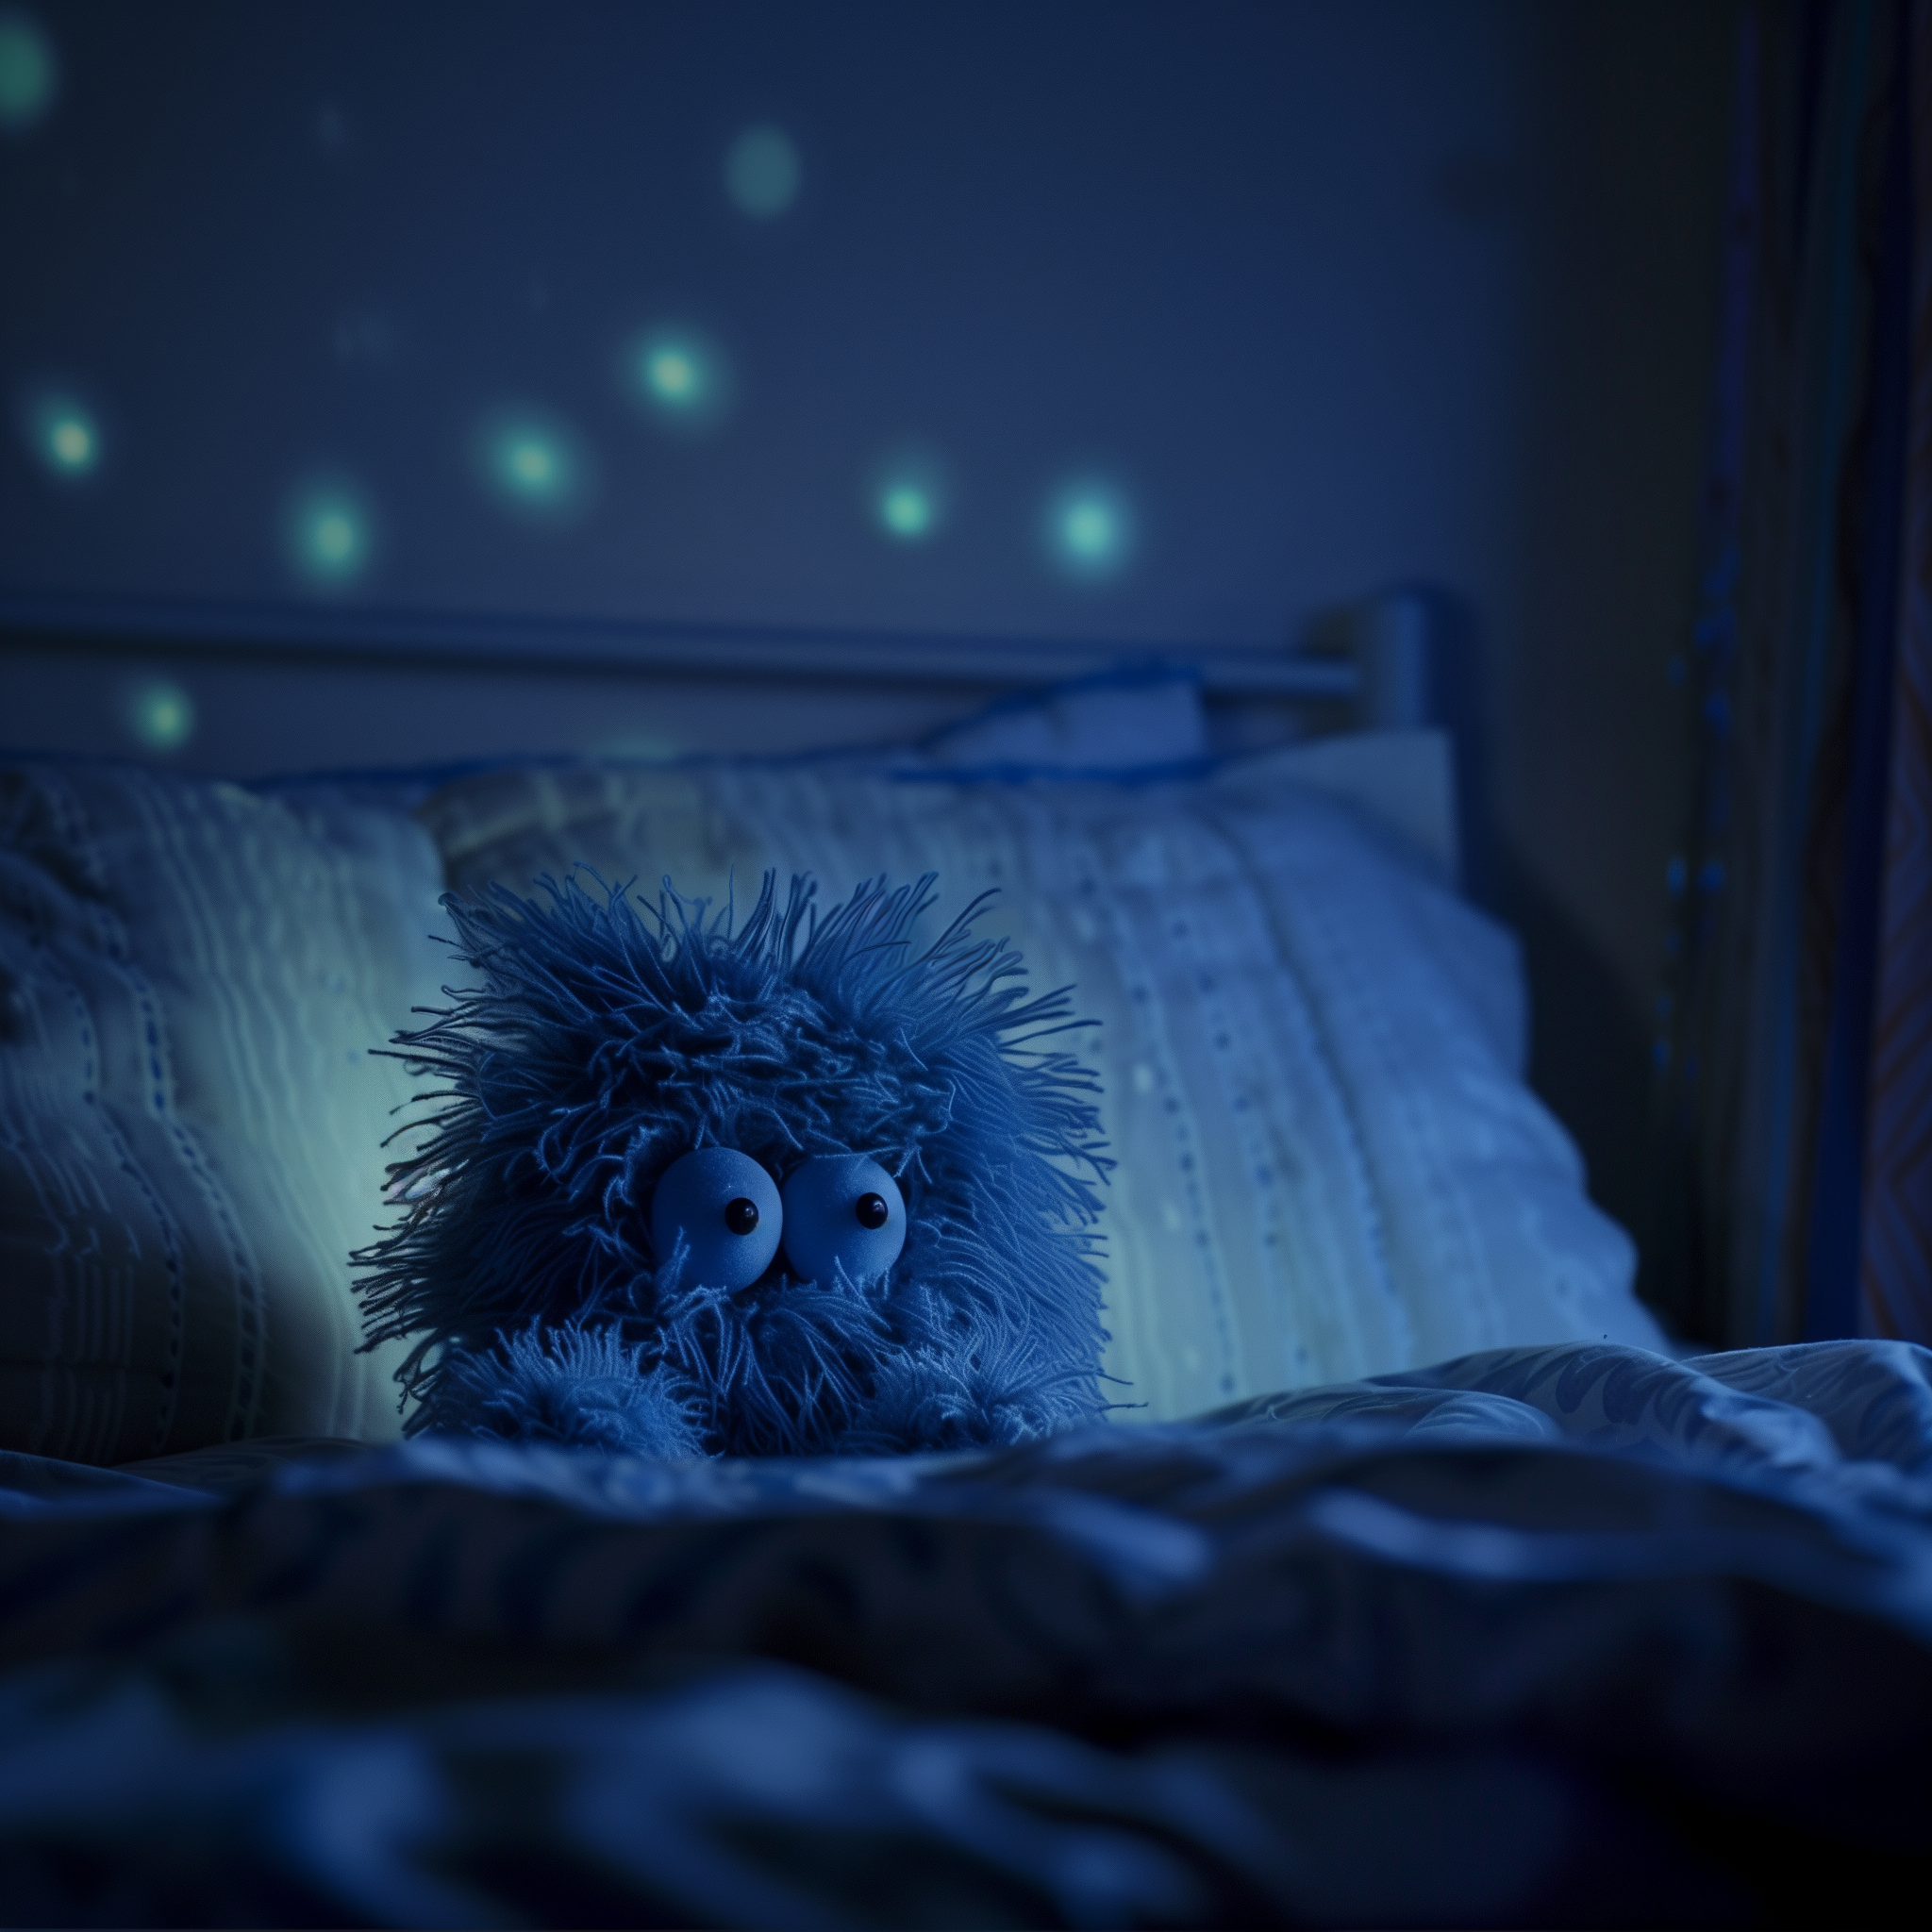 Glow in the dark star murals for kids scared of the dark, scared little monster toy on bed. 